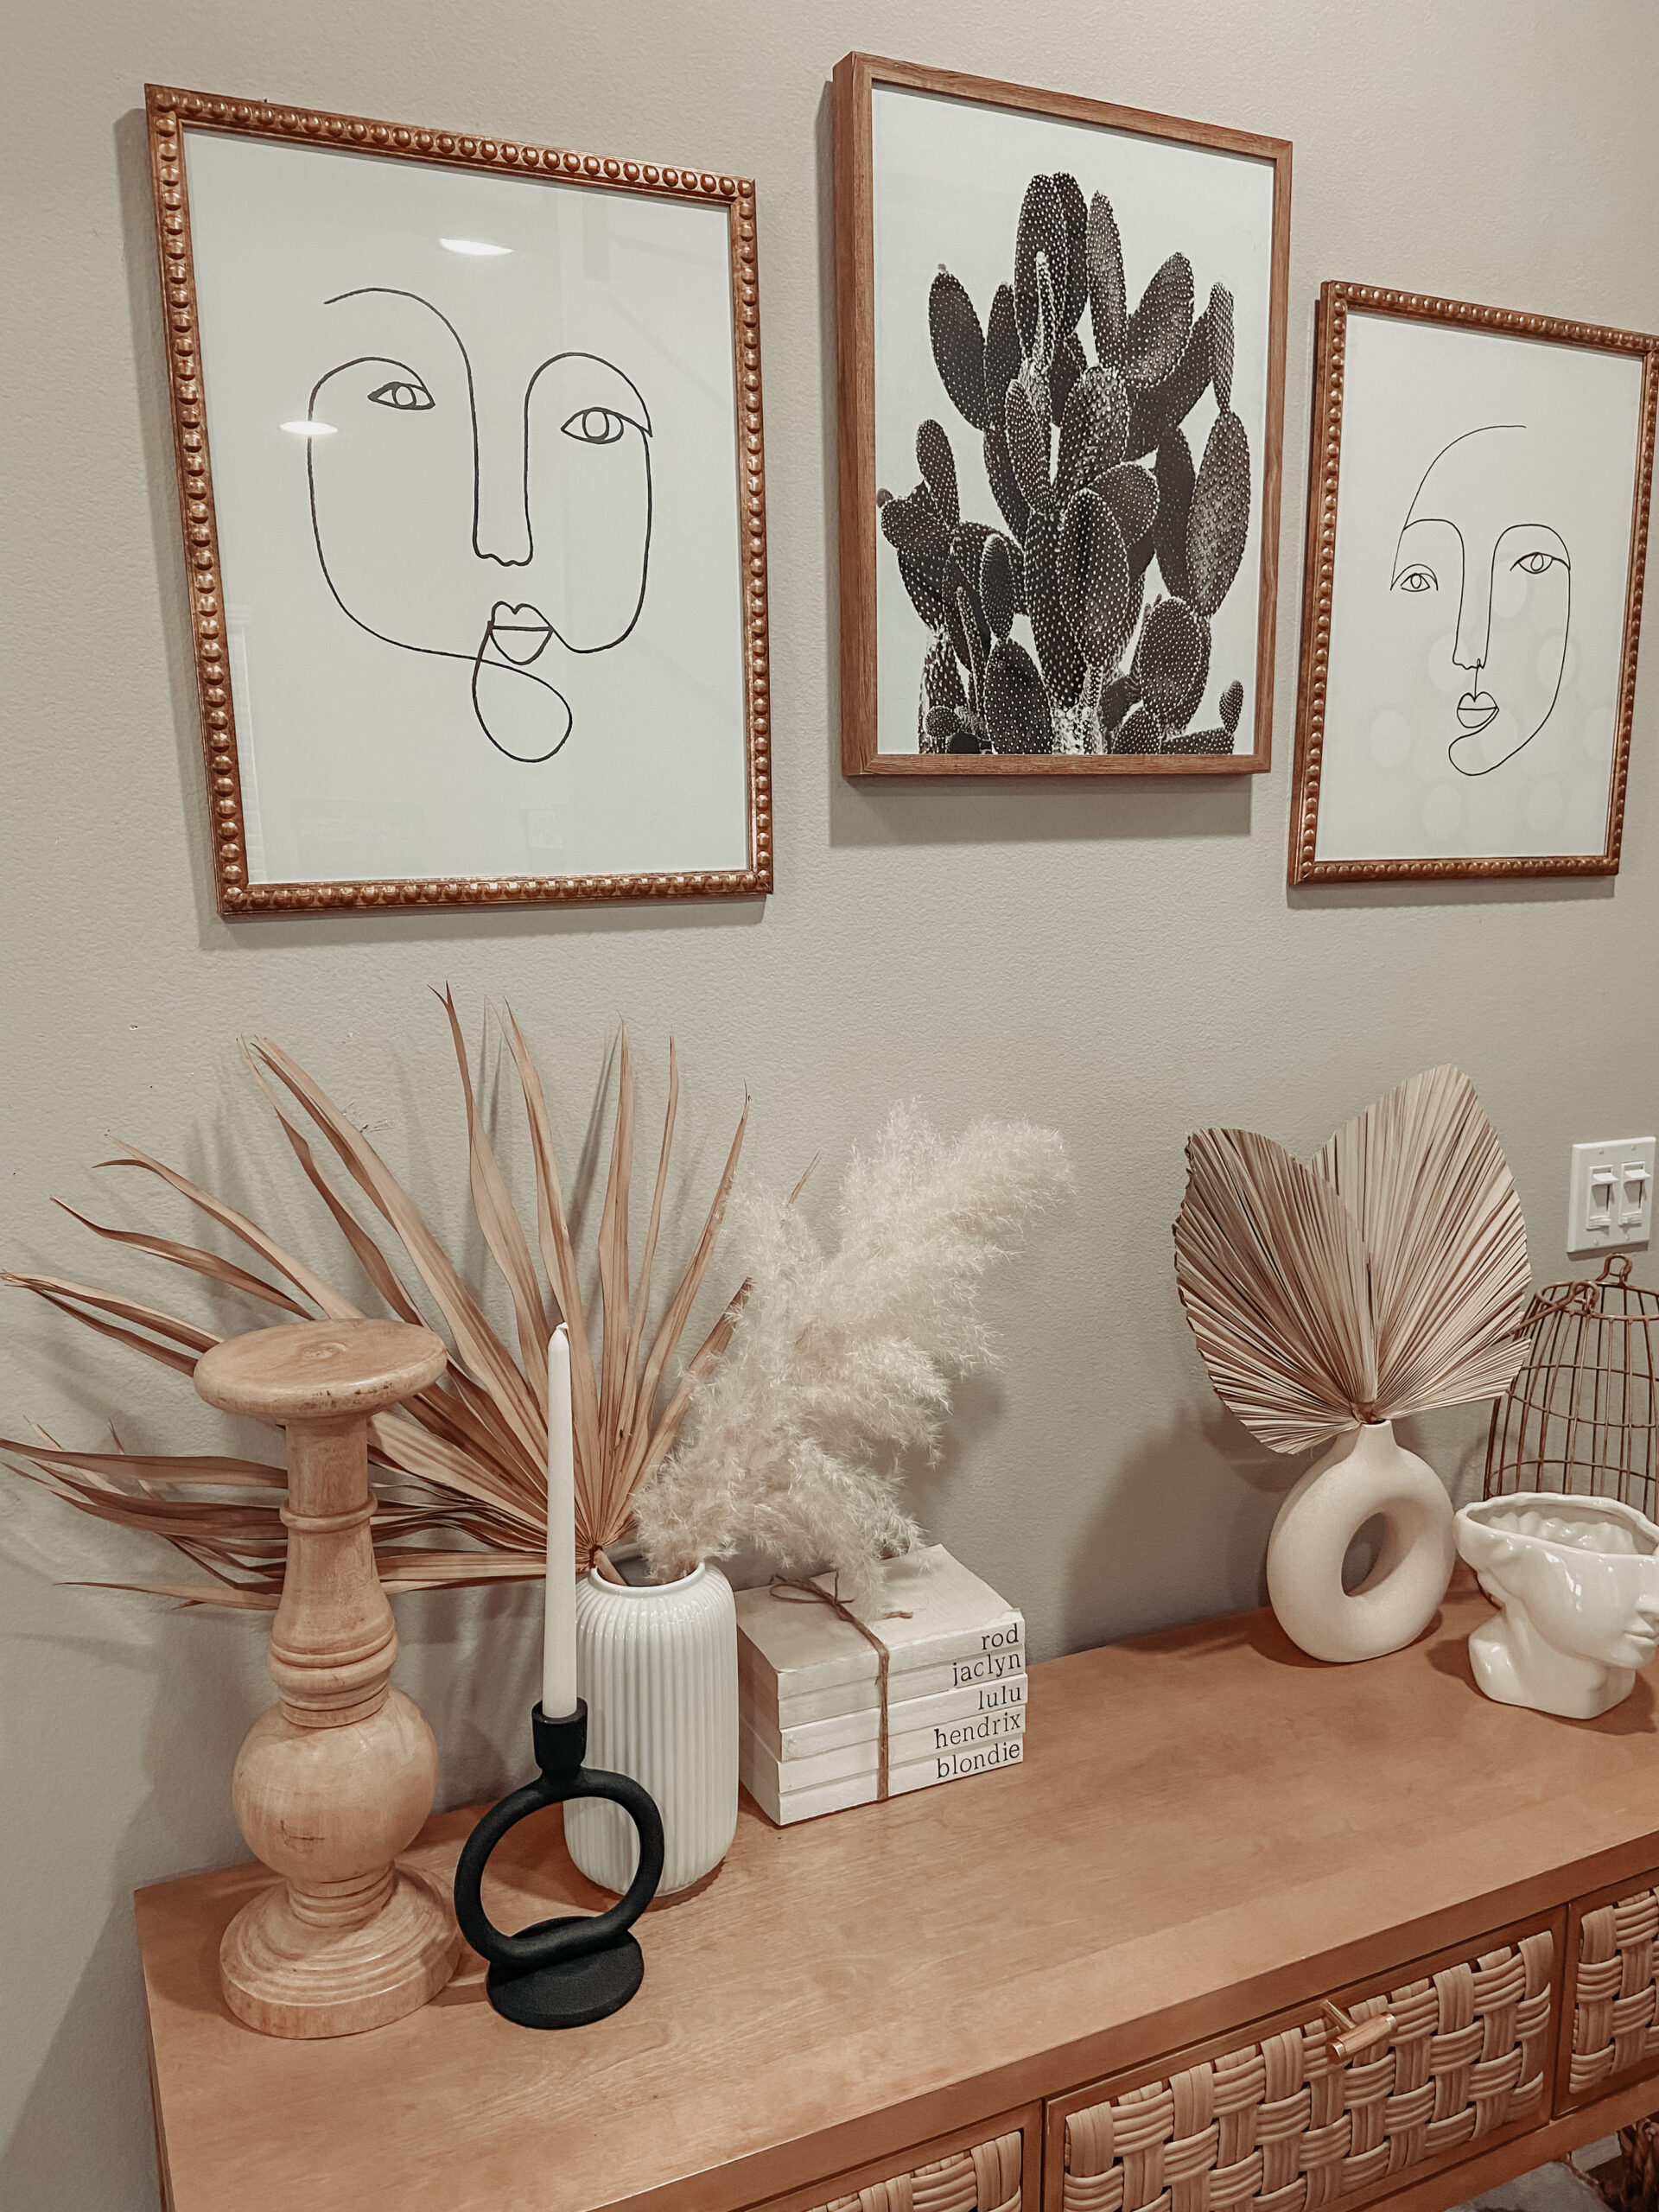 ENTRYWAY REFRESH-Jaclyn De Leon. Giving my entryway a refresh with affordable pieces from Target, Home Goods, Amazon, and H+M. Console table is from the Studio Mcgee line at Target